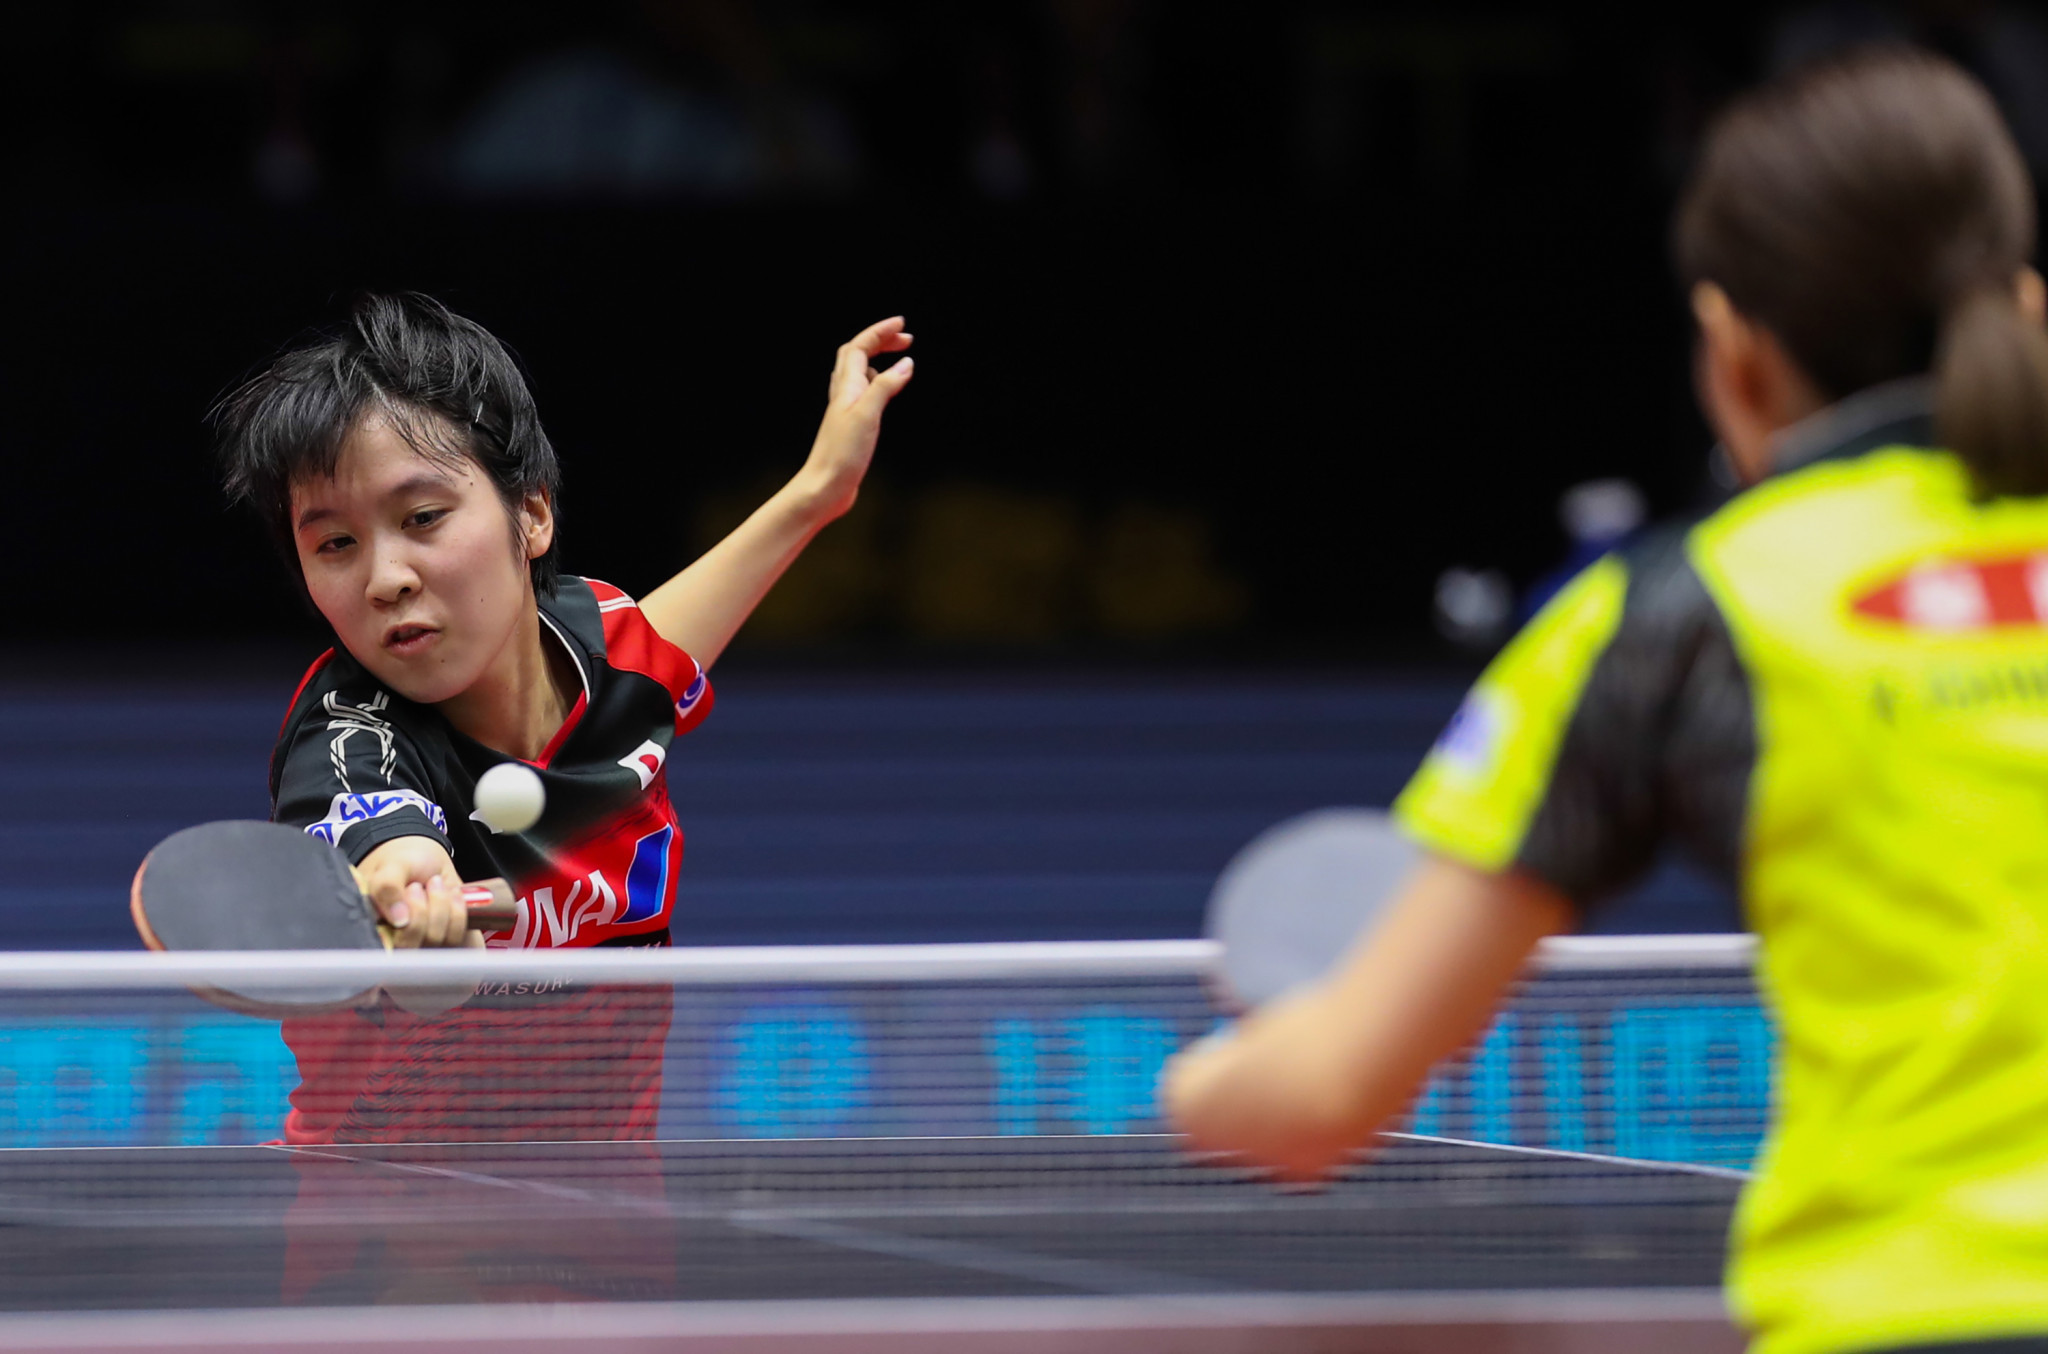 World Table Tennis announces three event hubs for first half of 2021